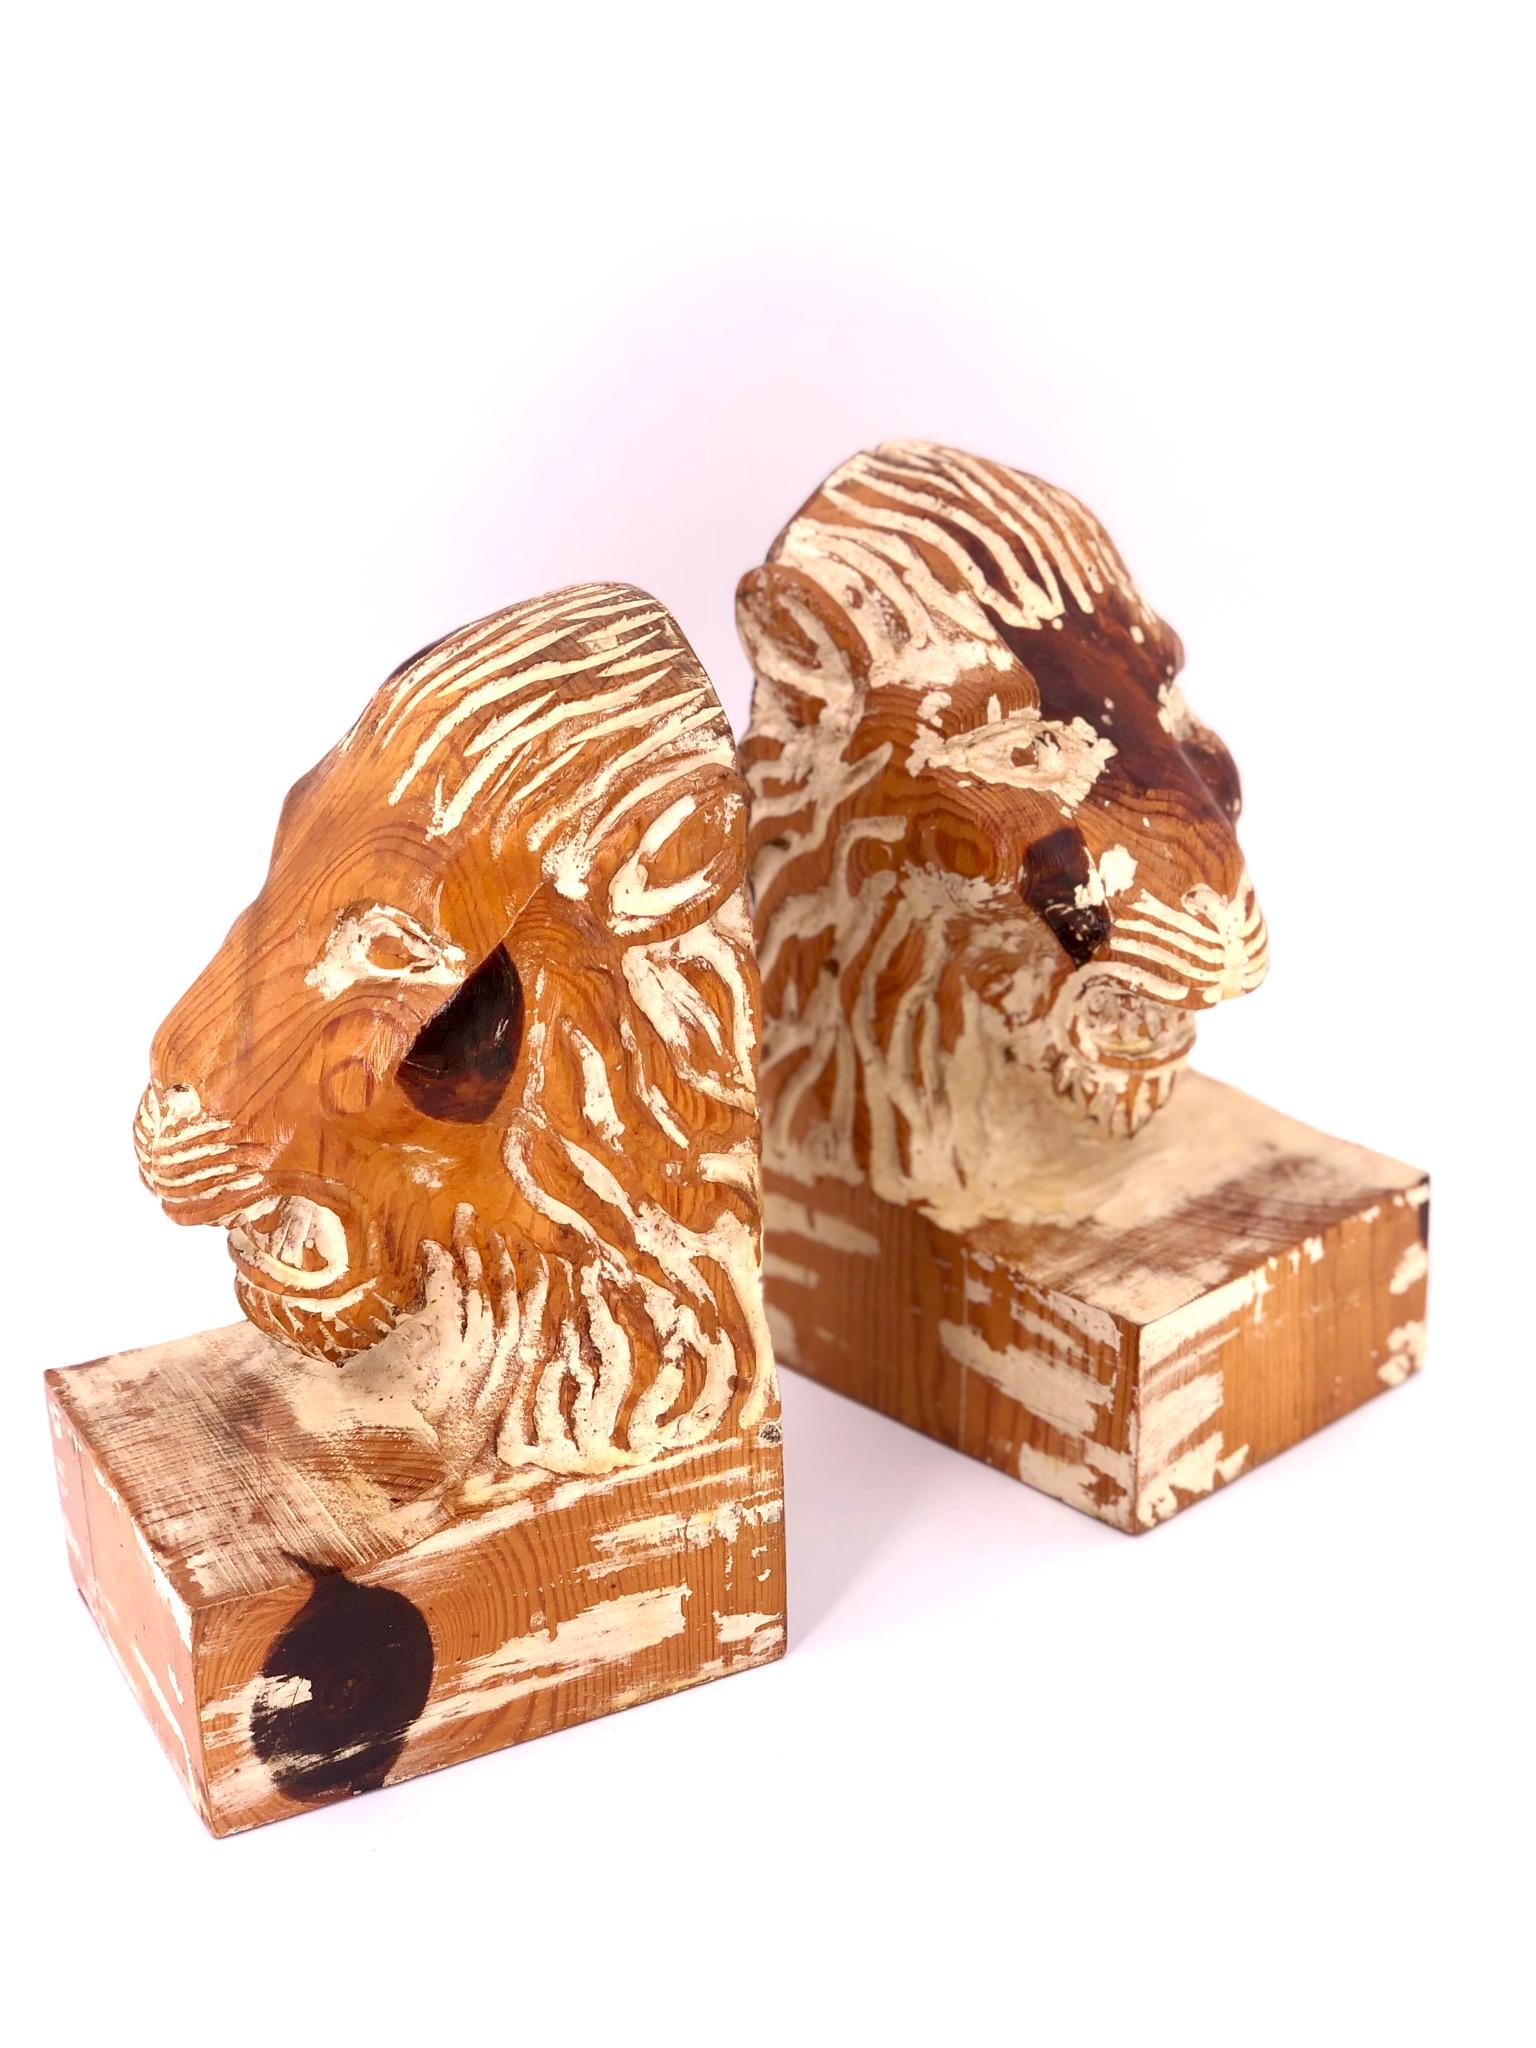 Pair of rare and beautiful hand carved bookends by Sarreid, Made in Spain, circa 1970s. With a whitewash finish.